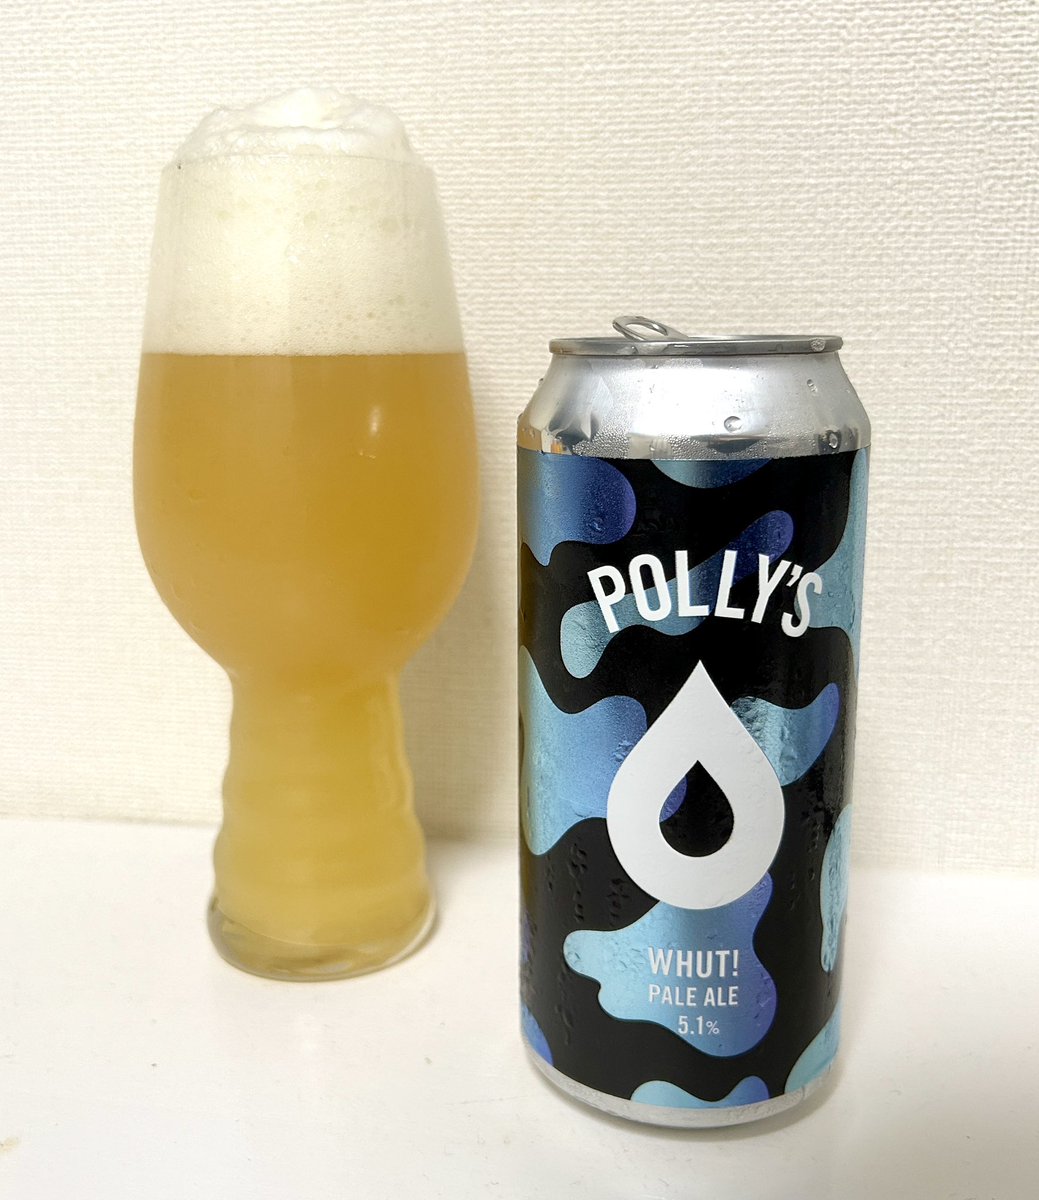 🍺Whut! by Polly's Brew Co.
Souvenir from the UK🇬🇧イギリス土産
Juicy and tropical but not that bitter.
めちゃくちゃ泡立ちがいいヘイジーPA。ジューシーで甘ったるくないトロピカルさ。苦味はなくてボディは軽め
#Craftbeer #クラフトビール